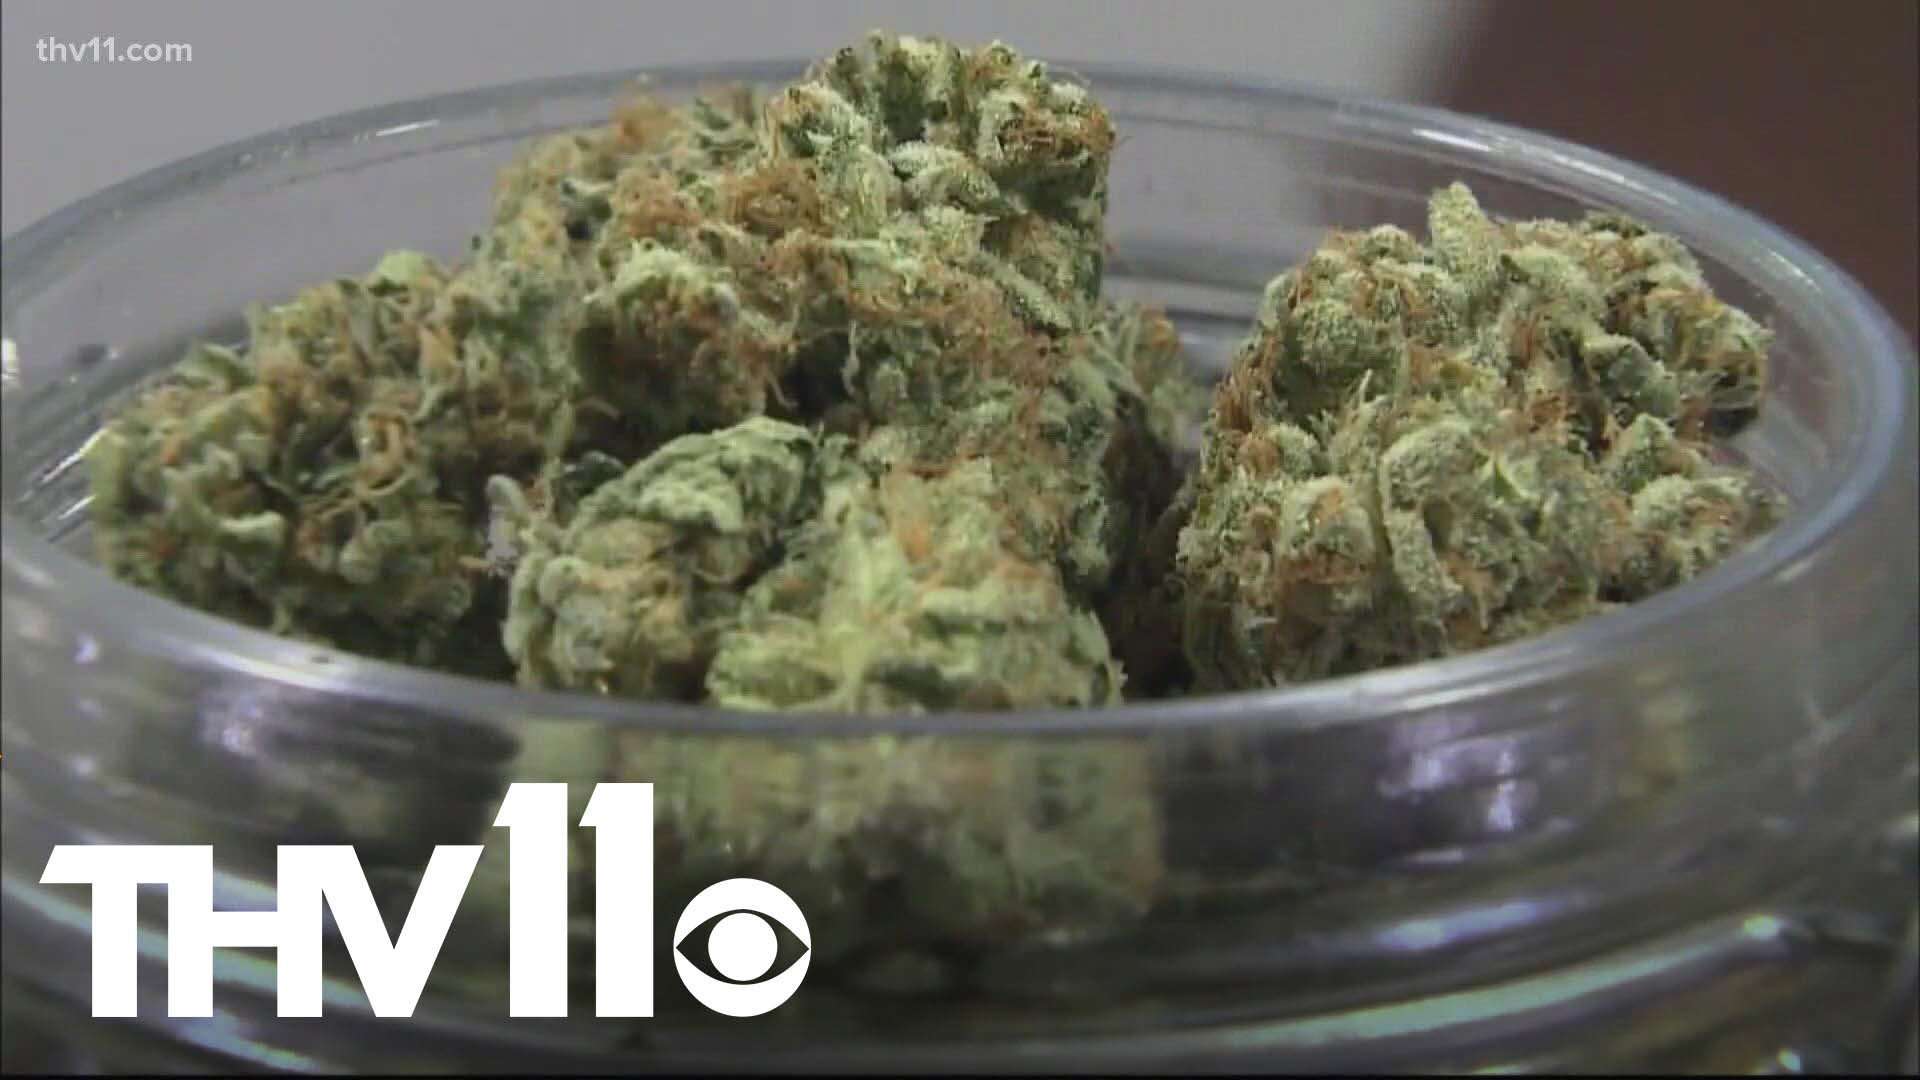 Responsible Growth Arkansas has filed a lawsuit against lawmakers after the recreational marijuana ballot title was denied certification for the upcoming election.